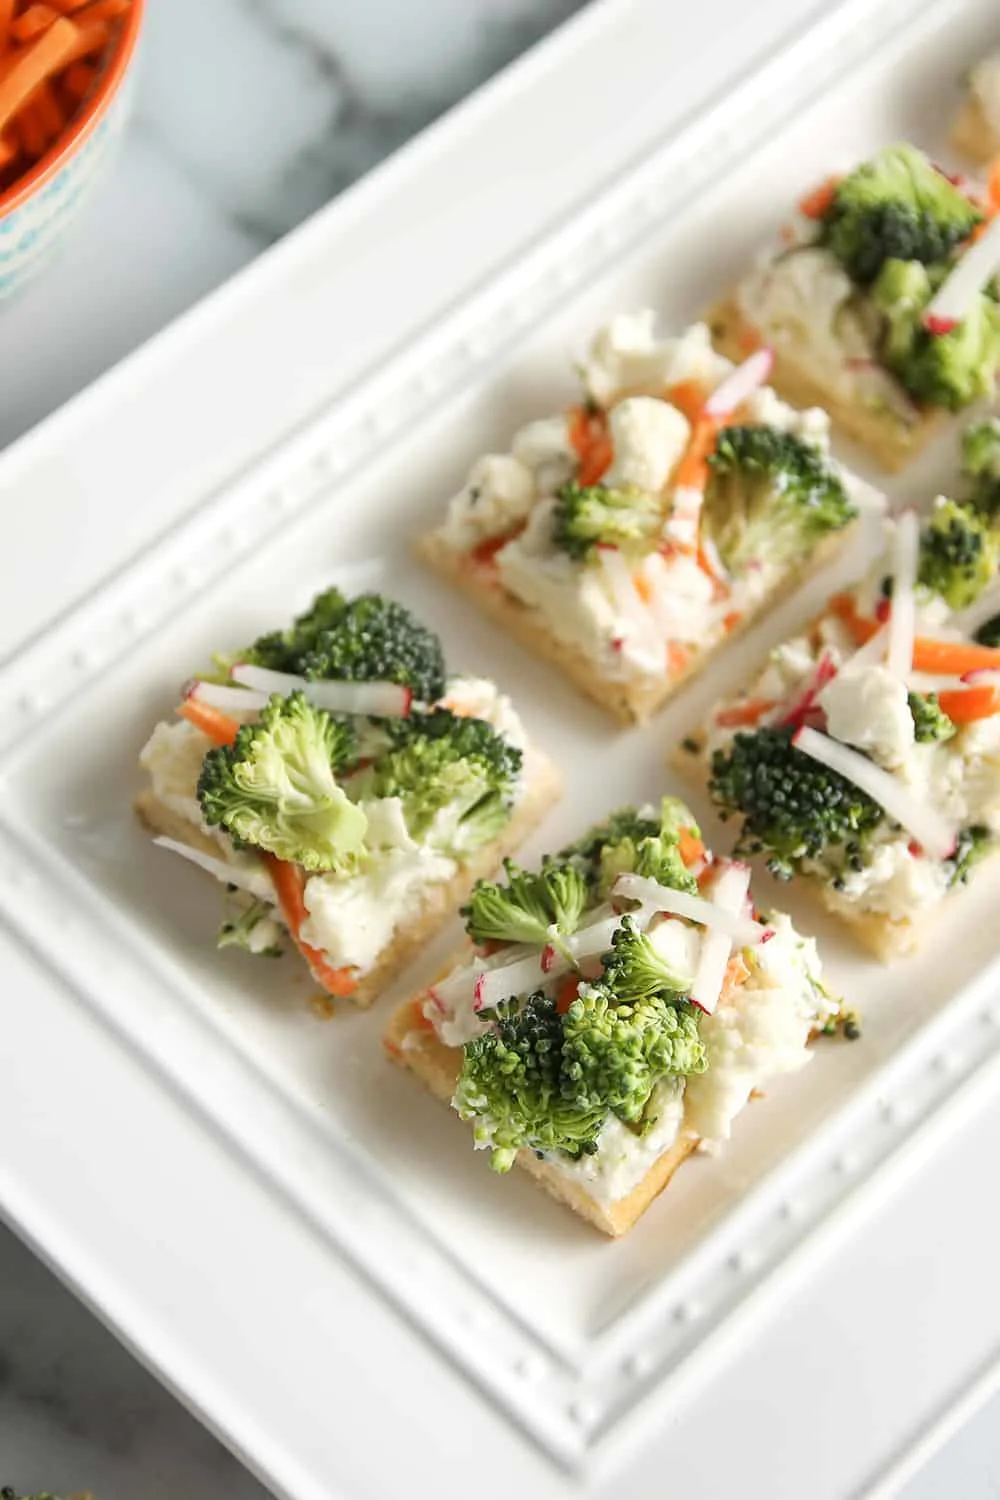 Vegetable Pizza is a staple appetizer in the Midwest